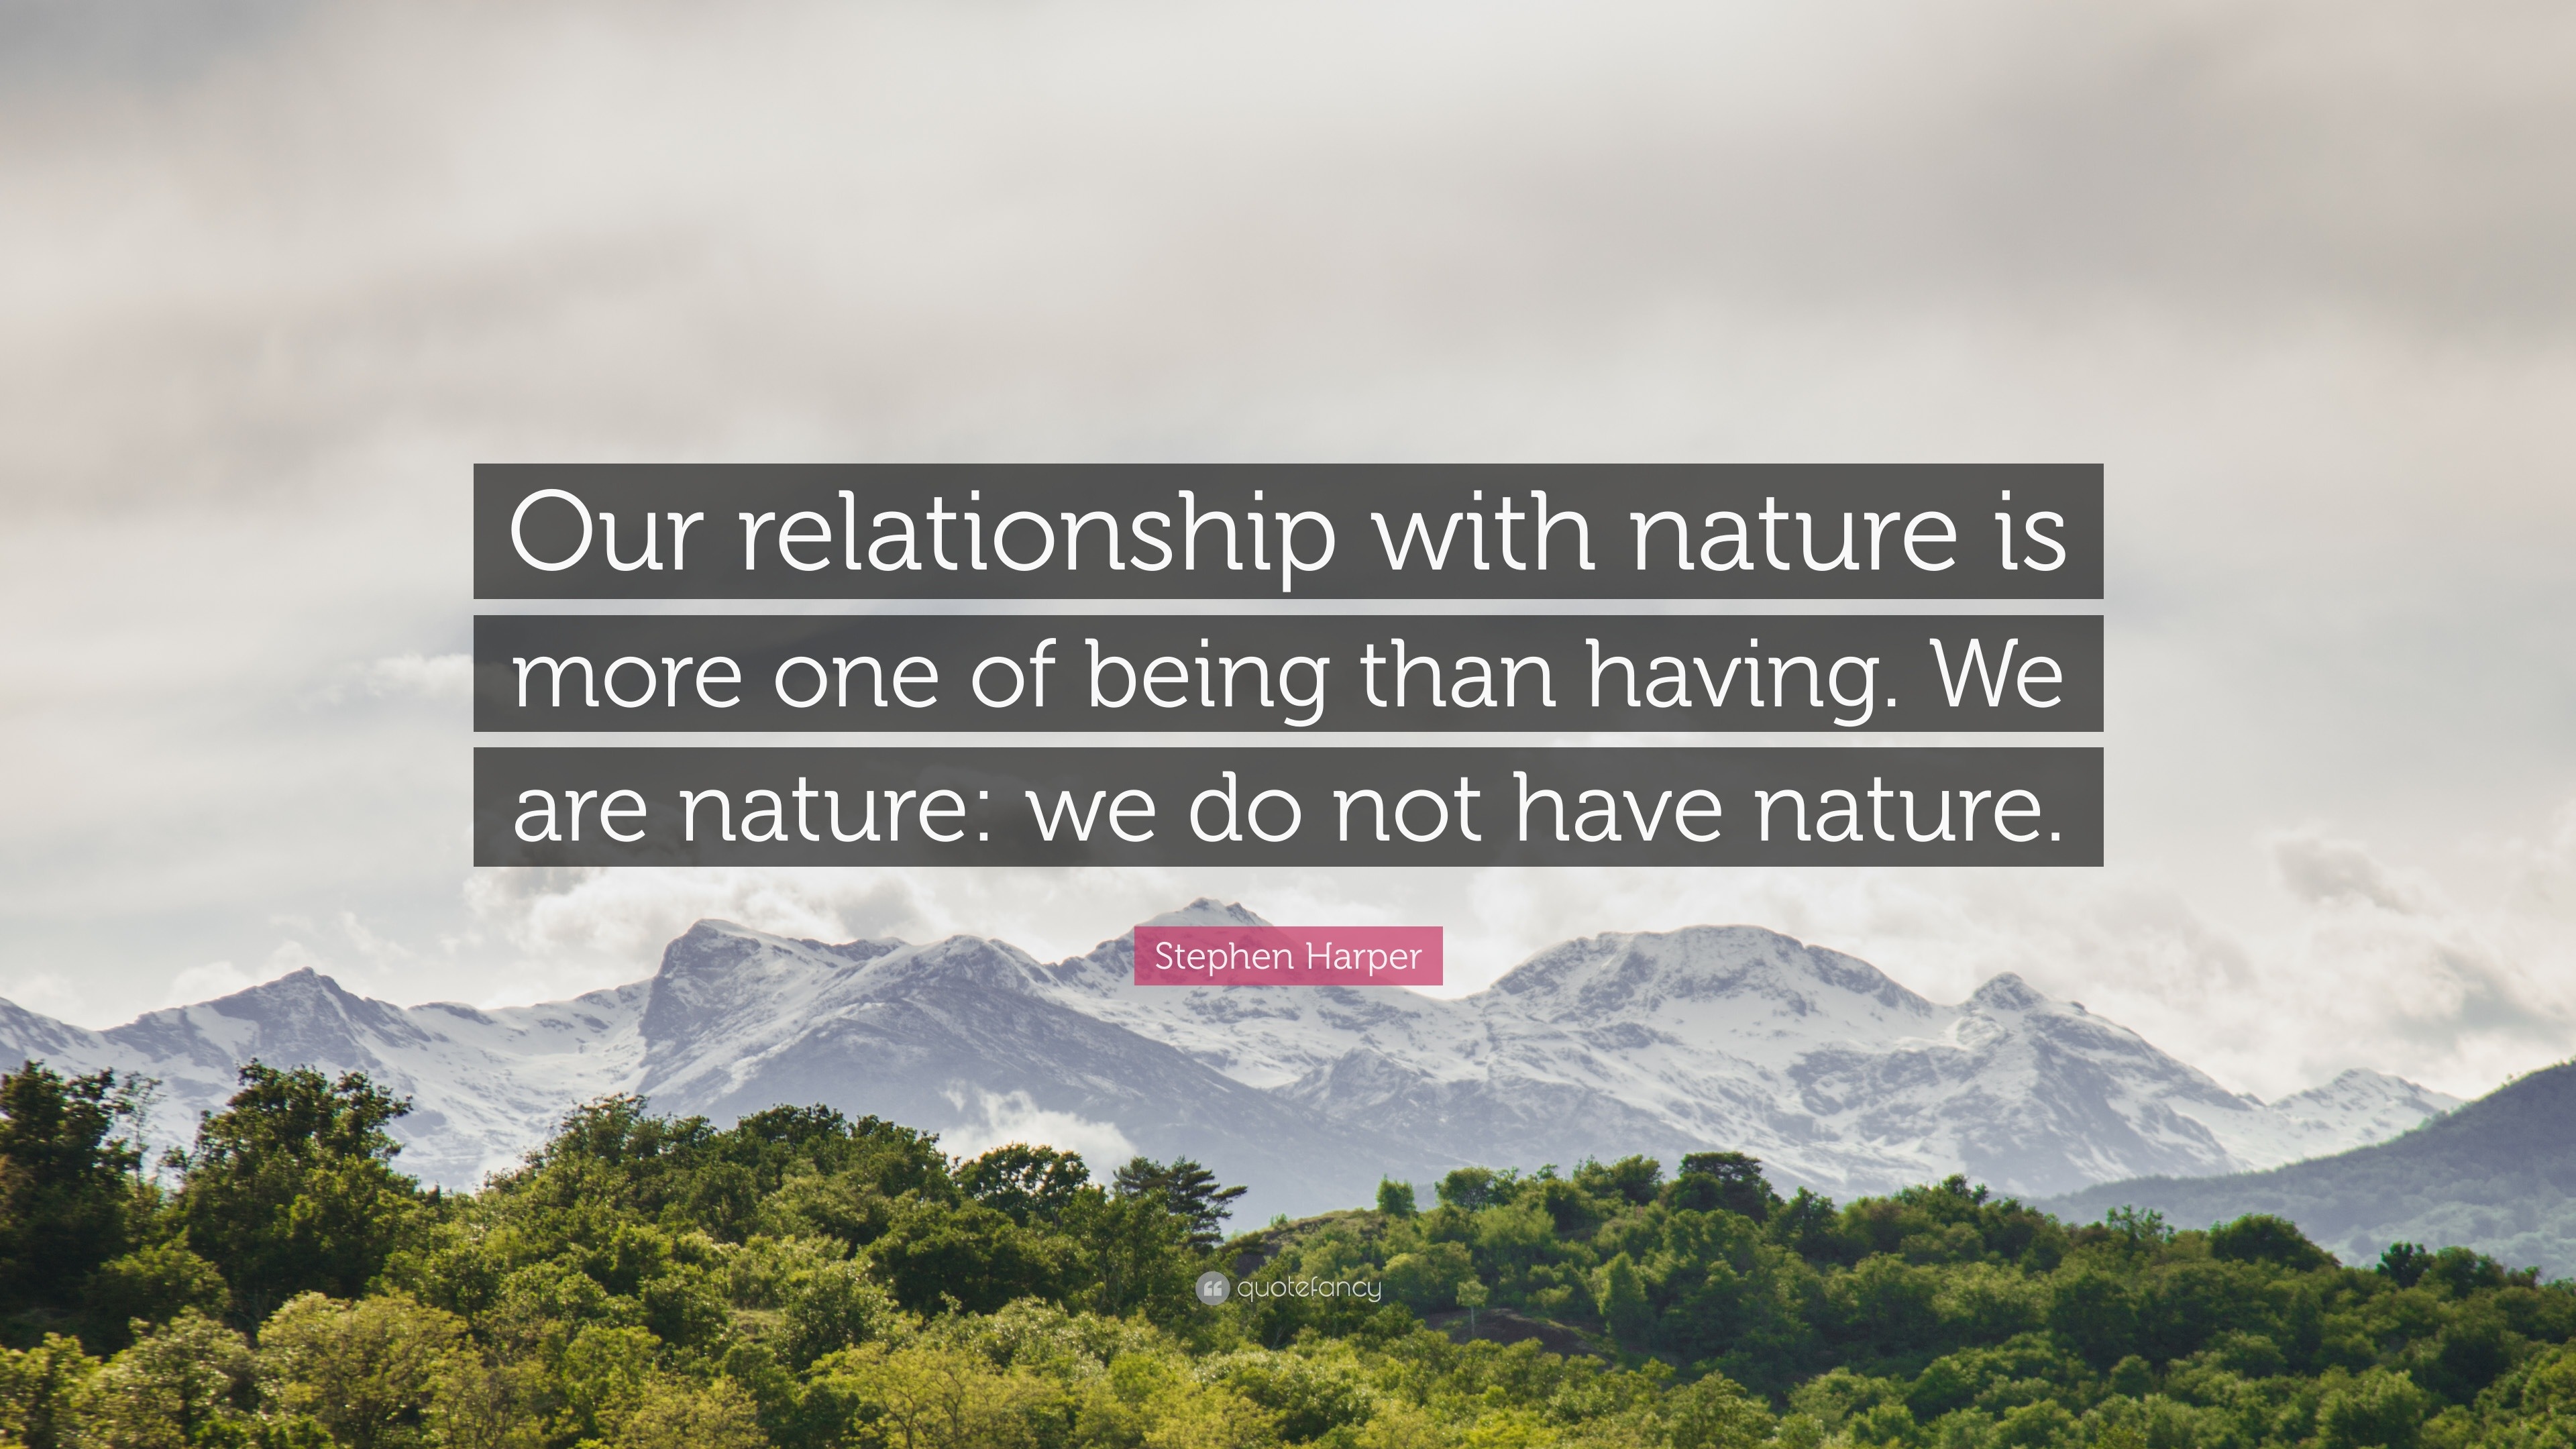 Stephen Harper Quote Our Relationship With Nature Is More One Of Being Than Having We Are Nature We Do Not Have Nature 7 Wallpapers Quotefancy